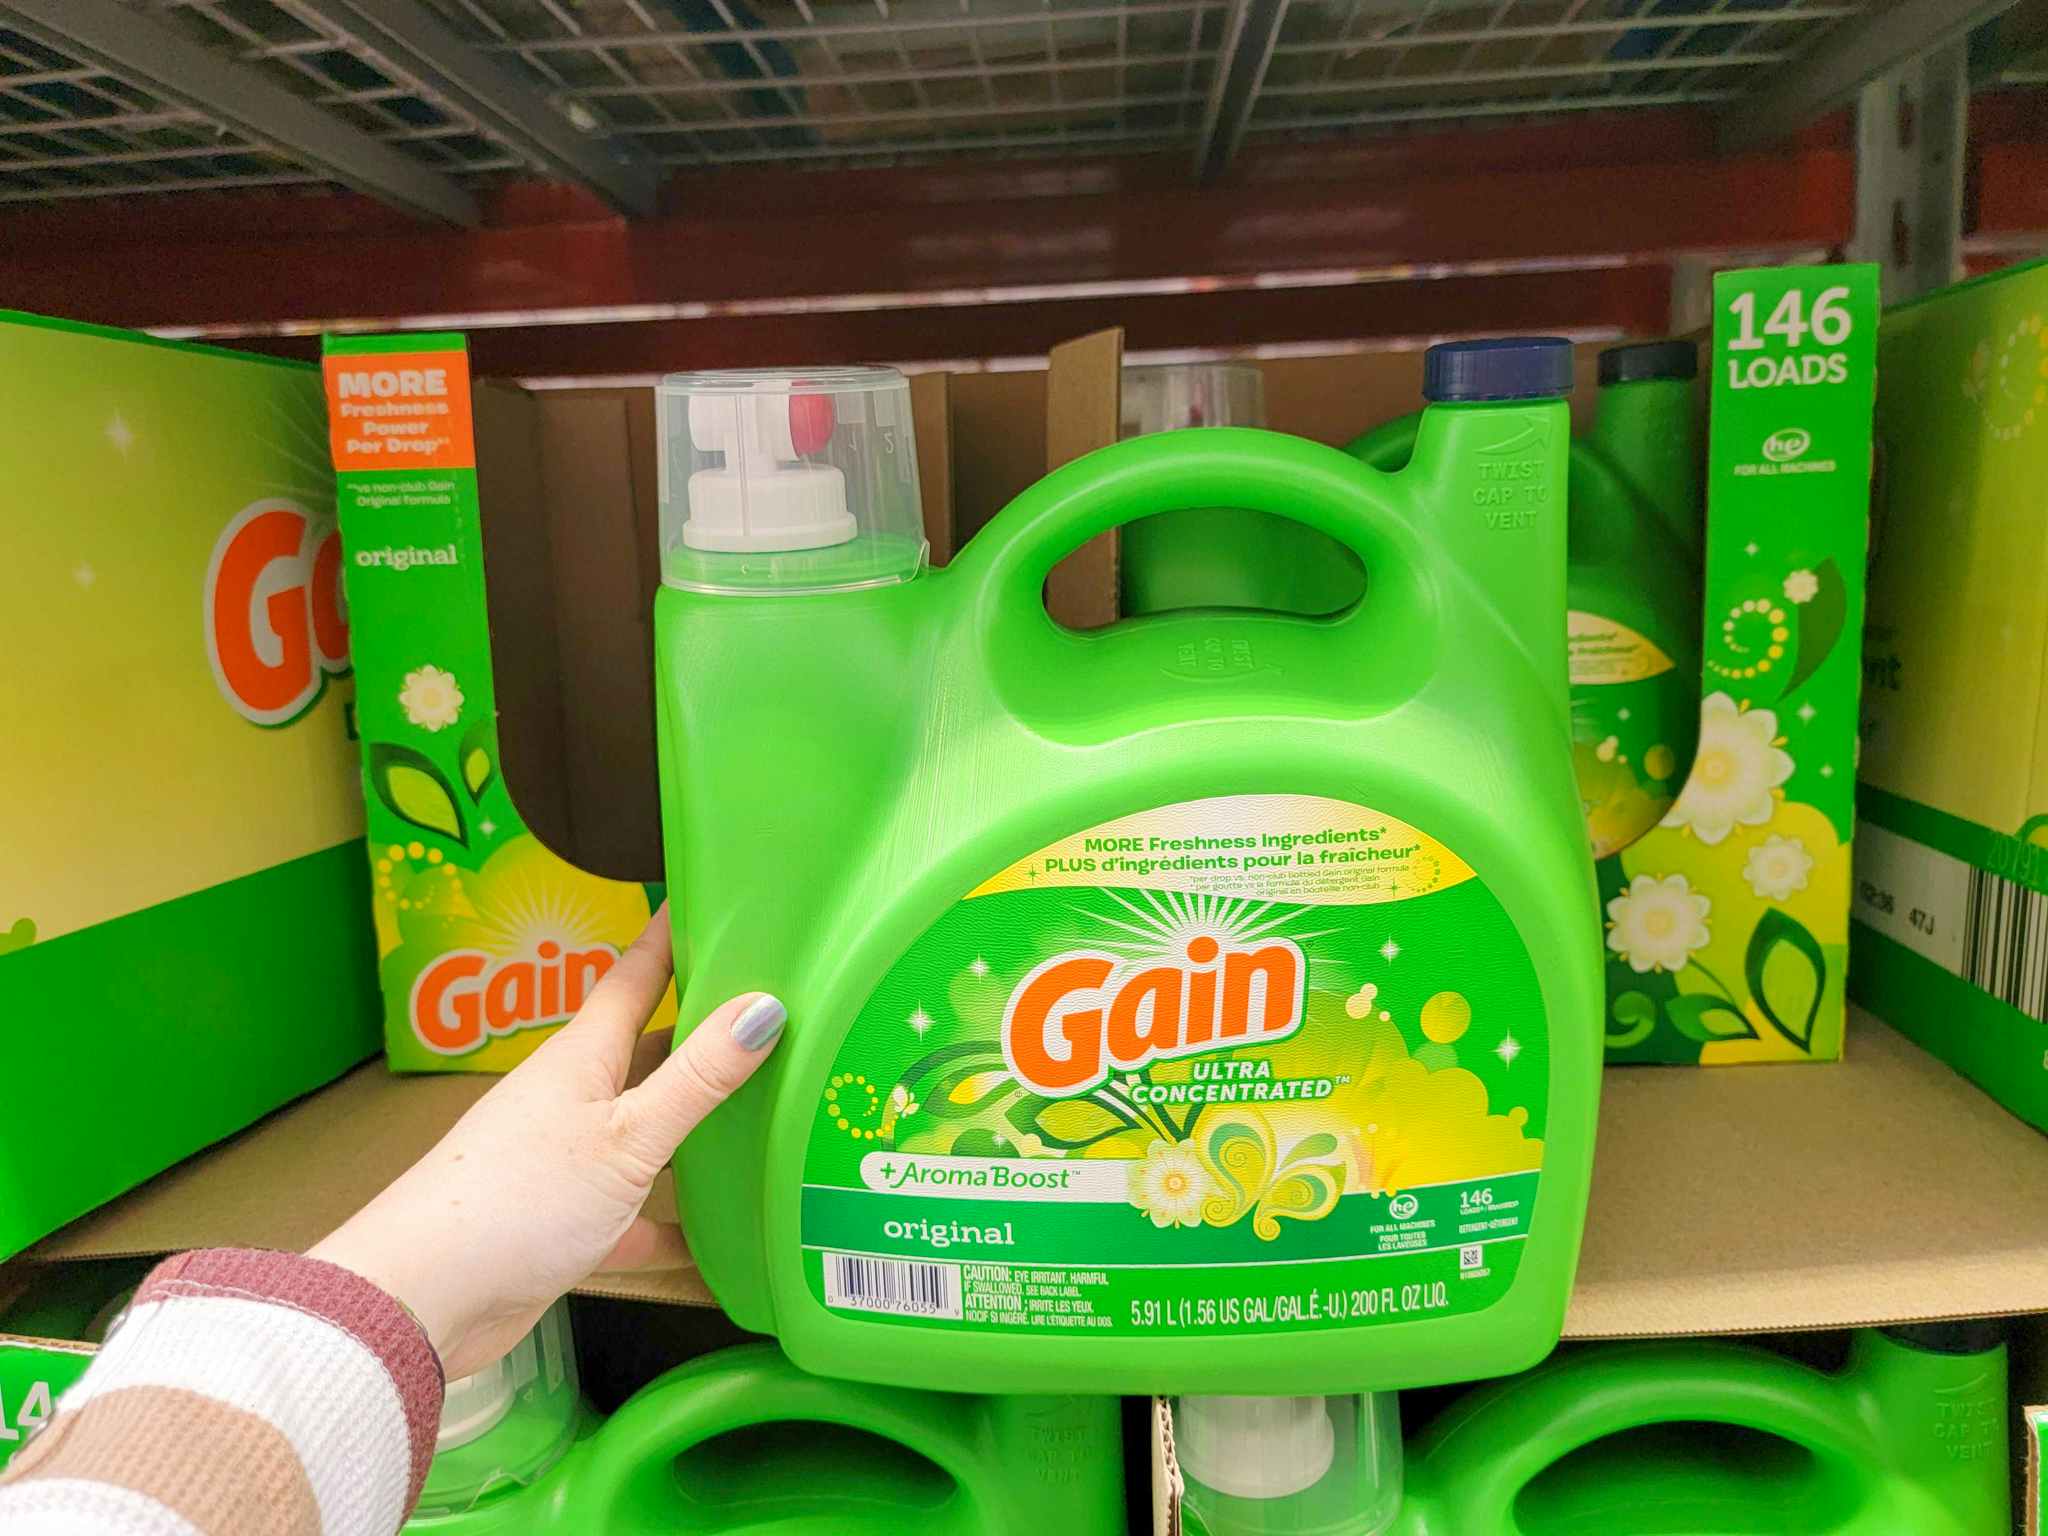 Gain and Tide Detergents, as Low as $10.55 With Amazon Coupons and Credits